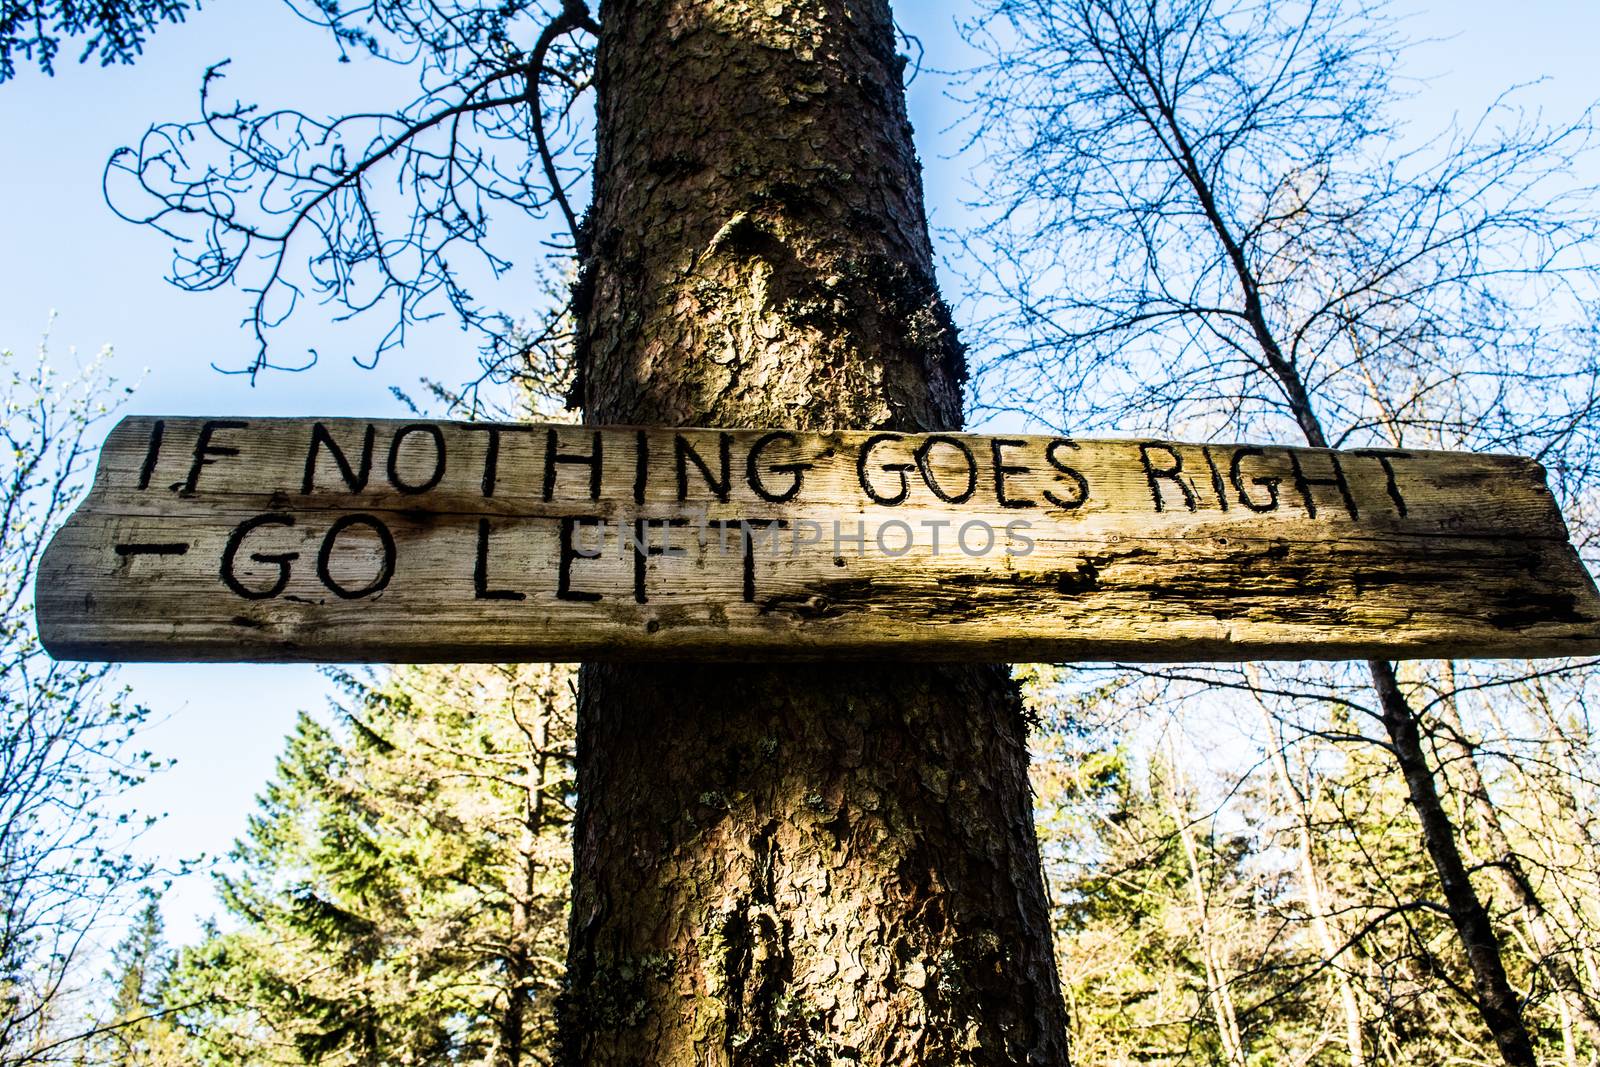 If nothing goes right, then go left wooden sign in the forest attached to a tree.